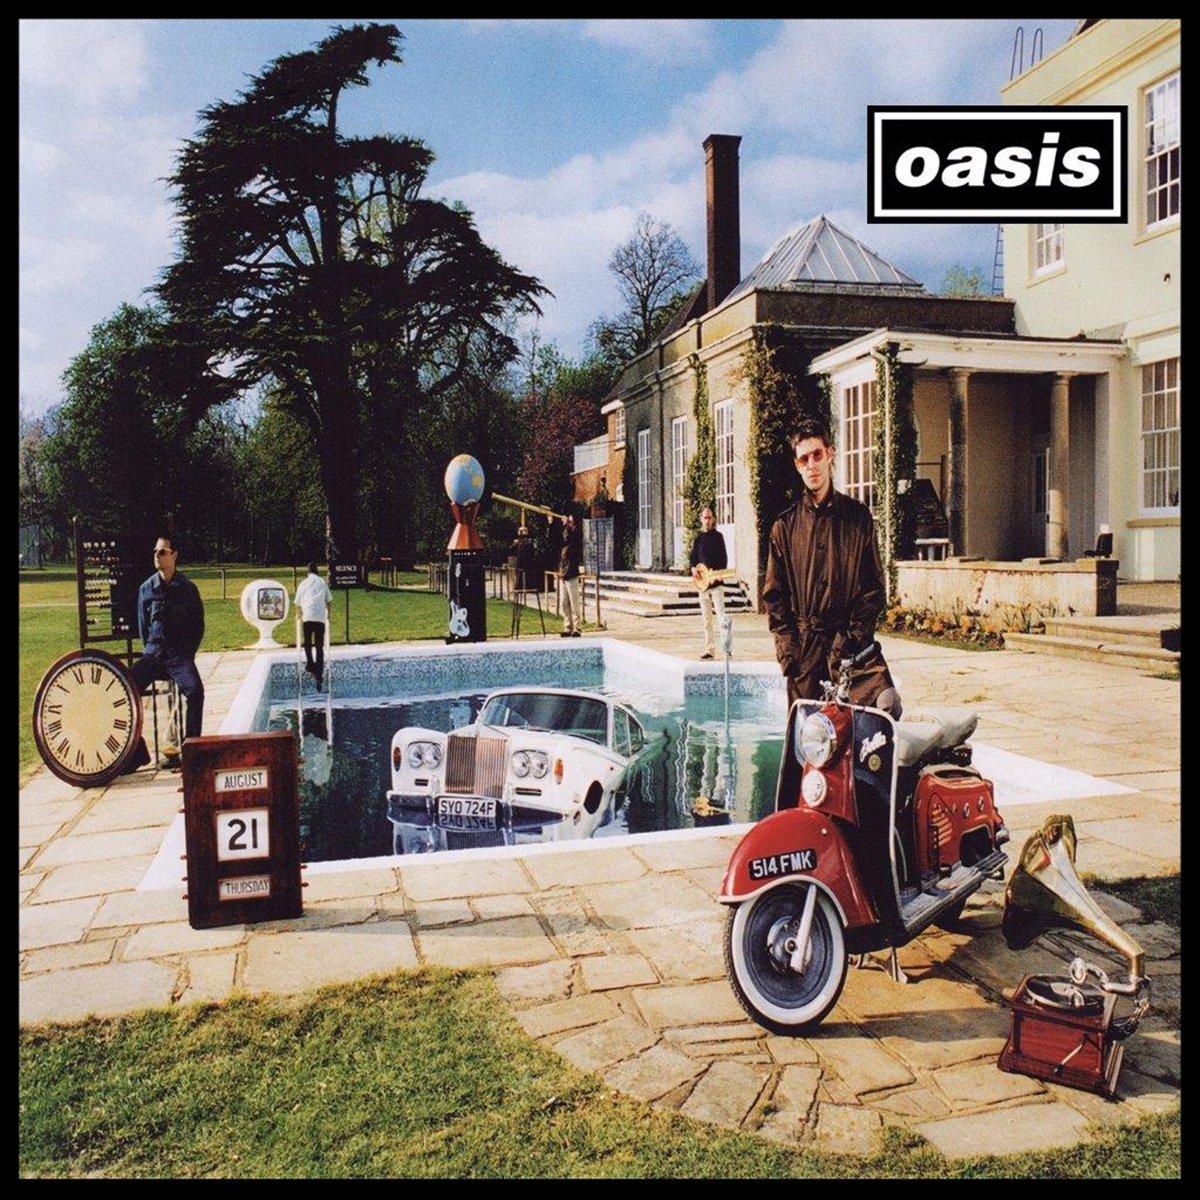 'Be Here Now' by Oasis, album cover